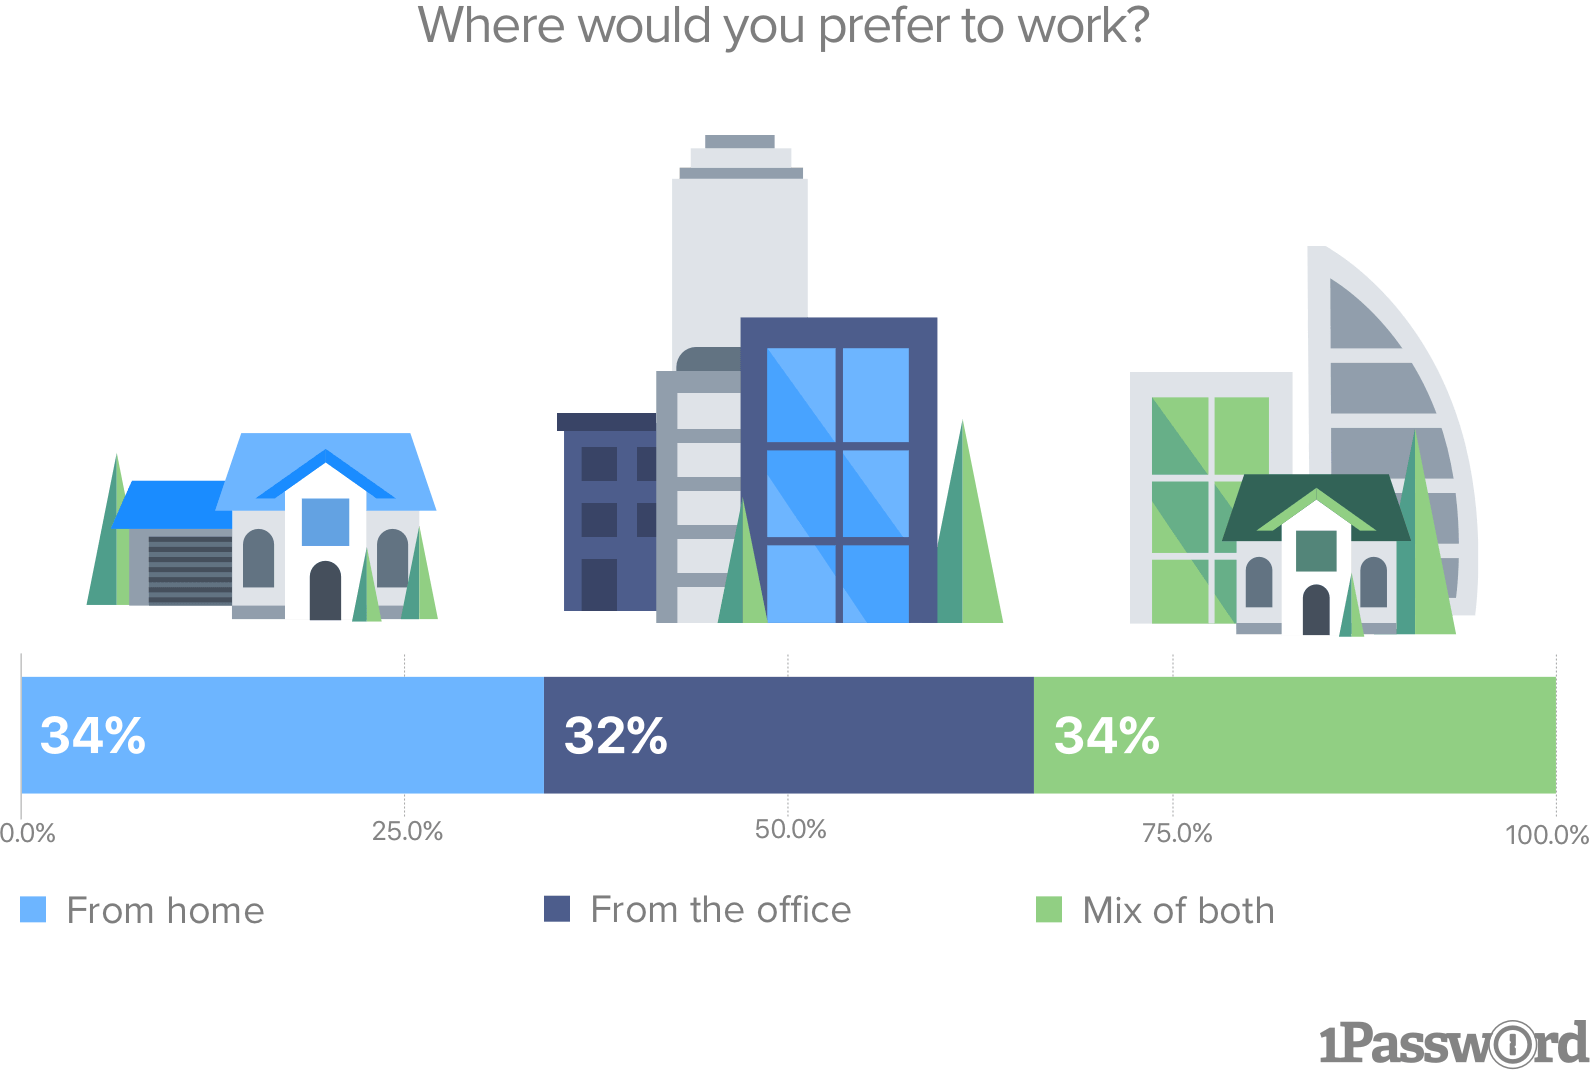 Where would you prefer to work?